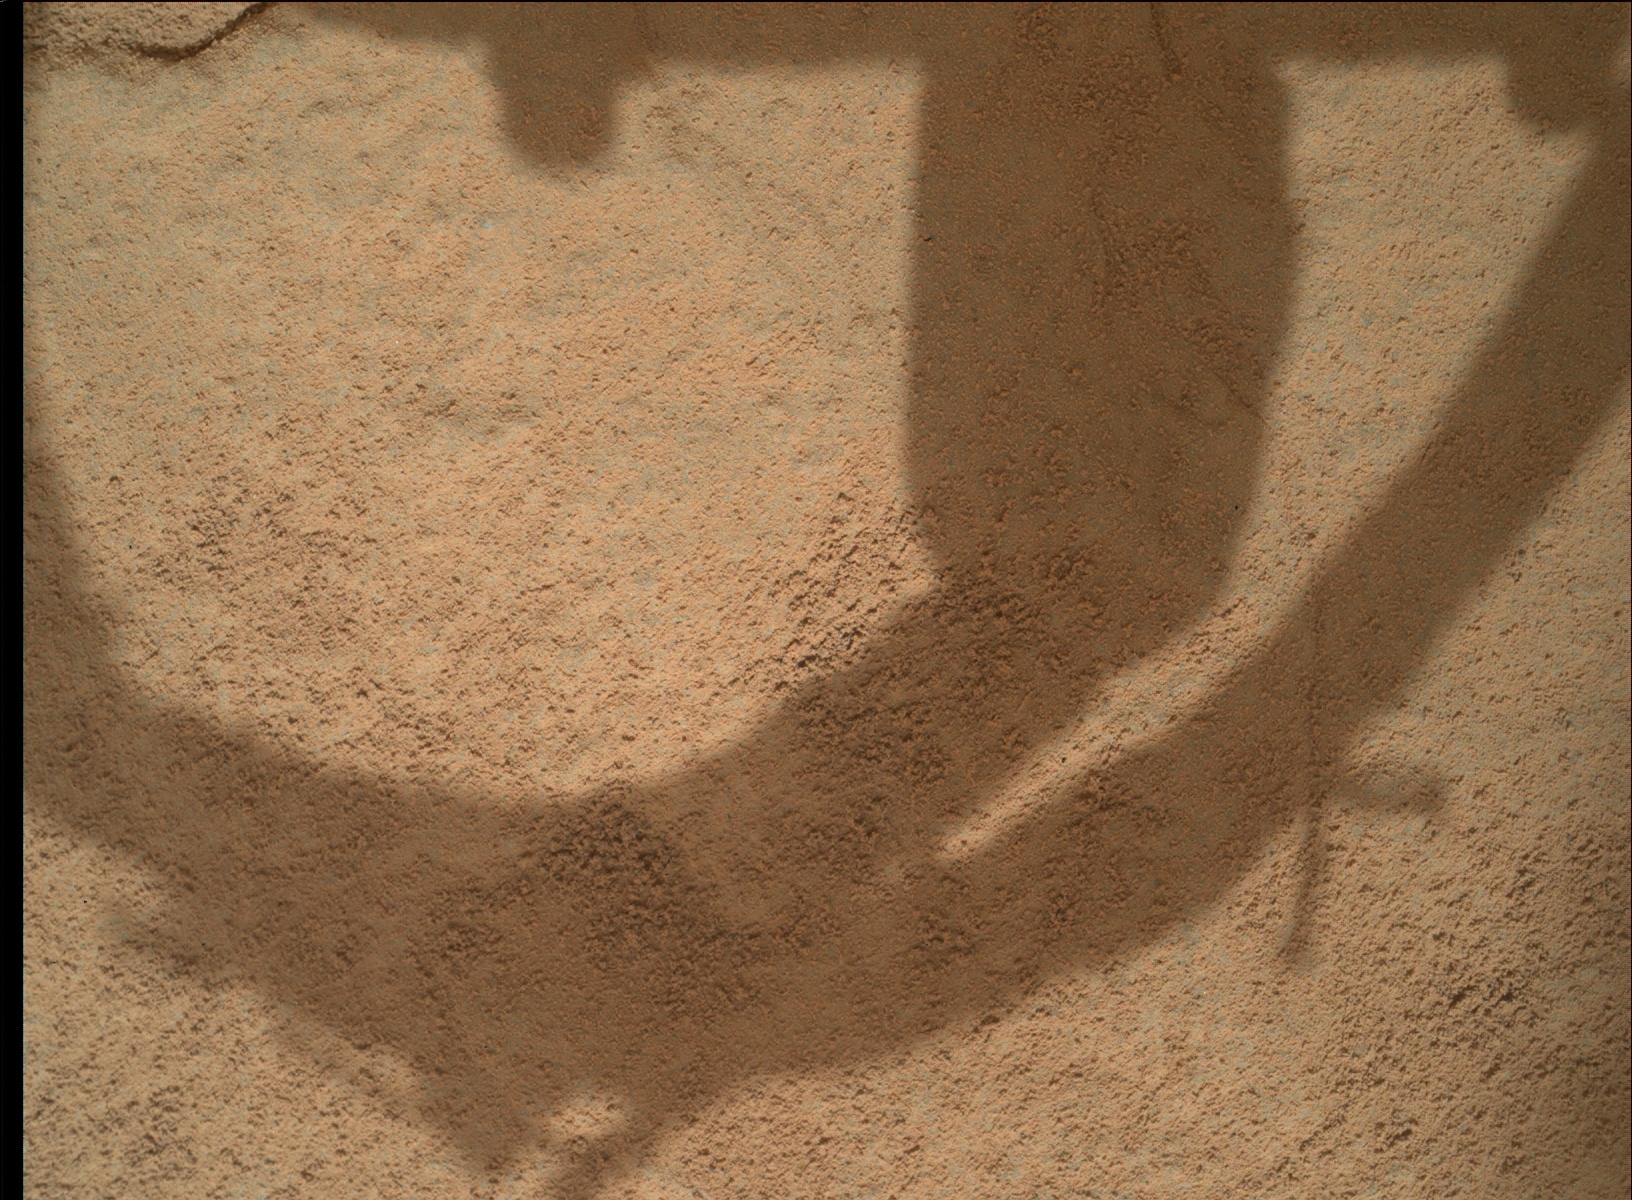 Nasa's Mars rover Curiosity acquired this image using its Mars Hand Lens Imager (MAHLI) on Sol 129